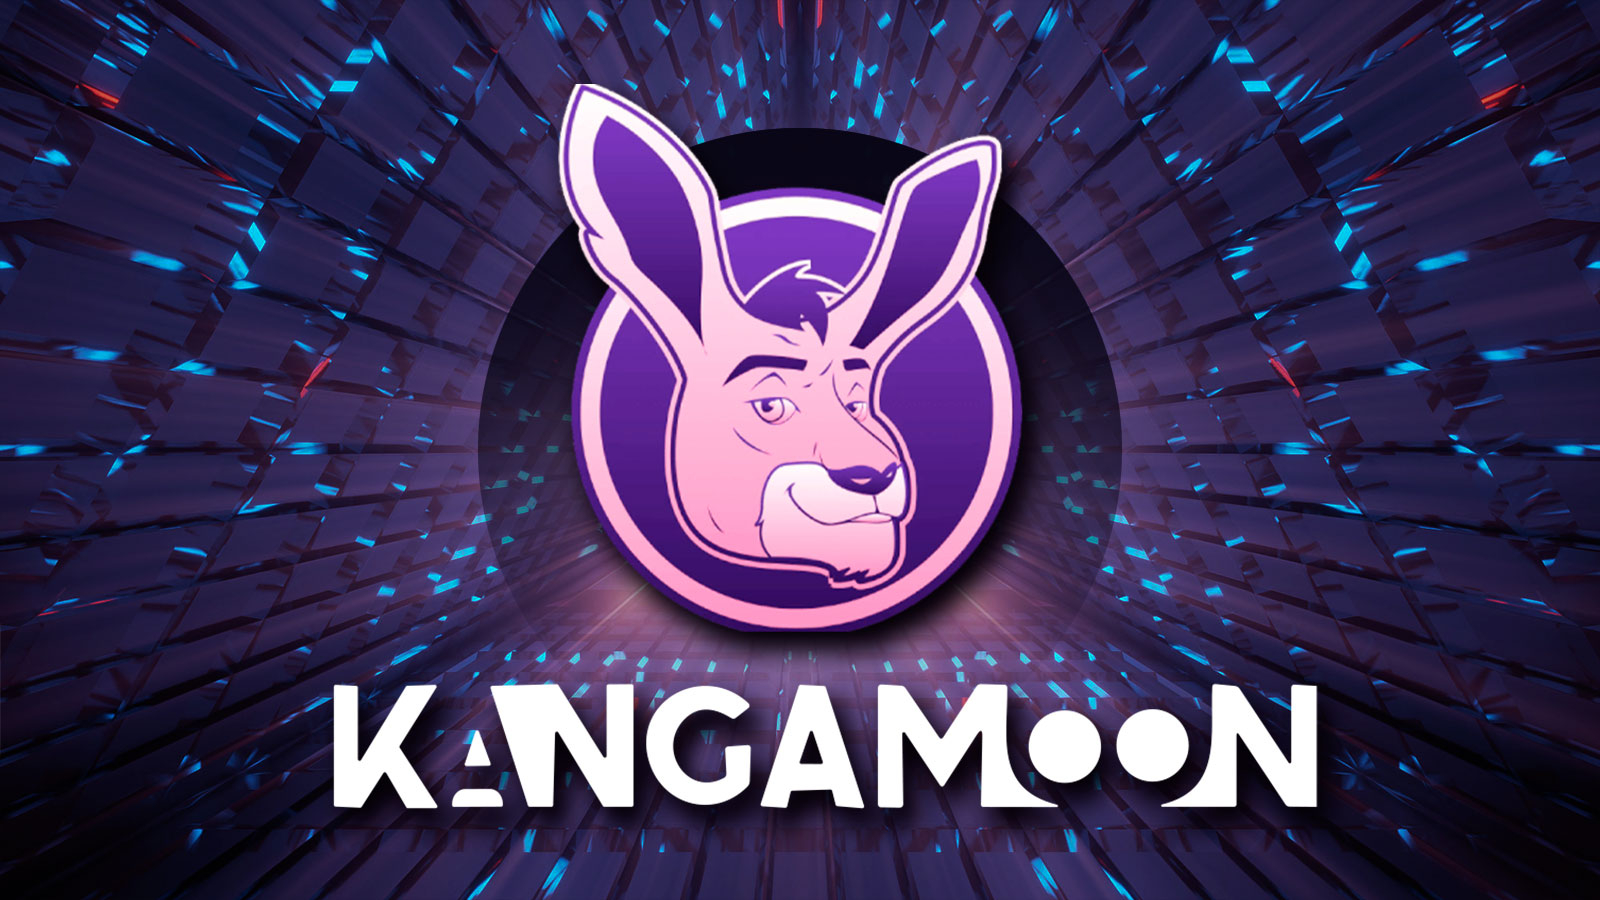 KangaMoon (KANG) Token Pre-Sale Might be Spotlighted in April as Polygon (MATIC) and Cardano (ADA) Top Altcoins Recover Fast